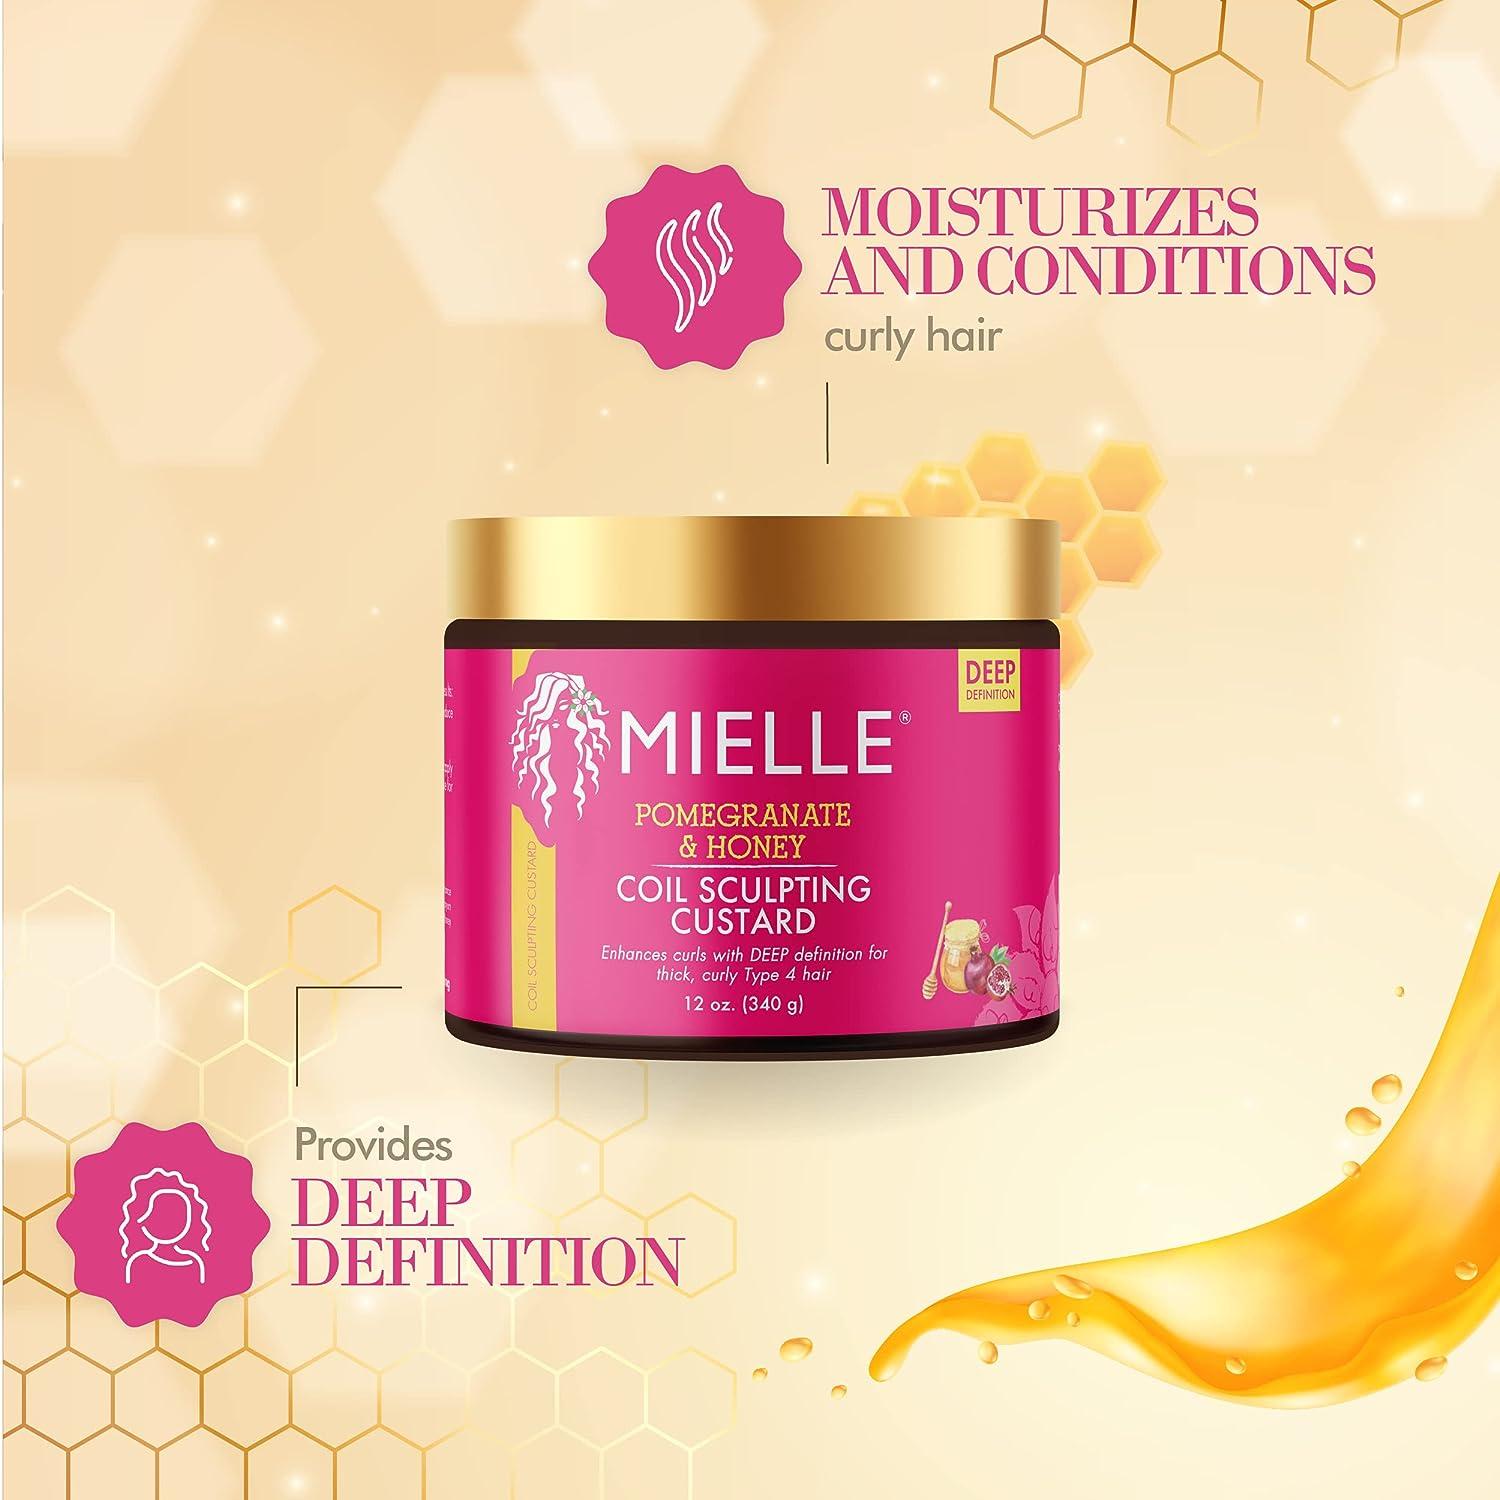 Mielle Organics Curl Smoothie with Pomegranate and Honey, Moisturizing Curl  Cream for Curly Hair, Anti-Frizz Curl Enhancer for Thick Type 4 Hair, 12